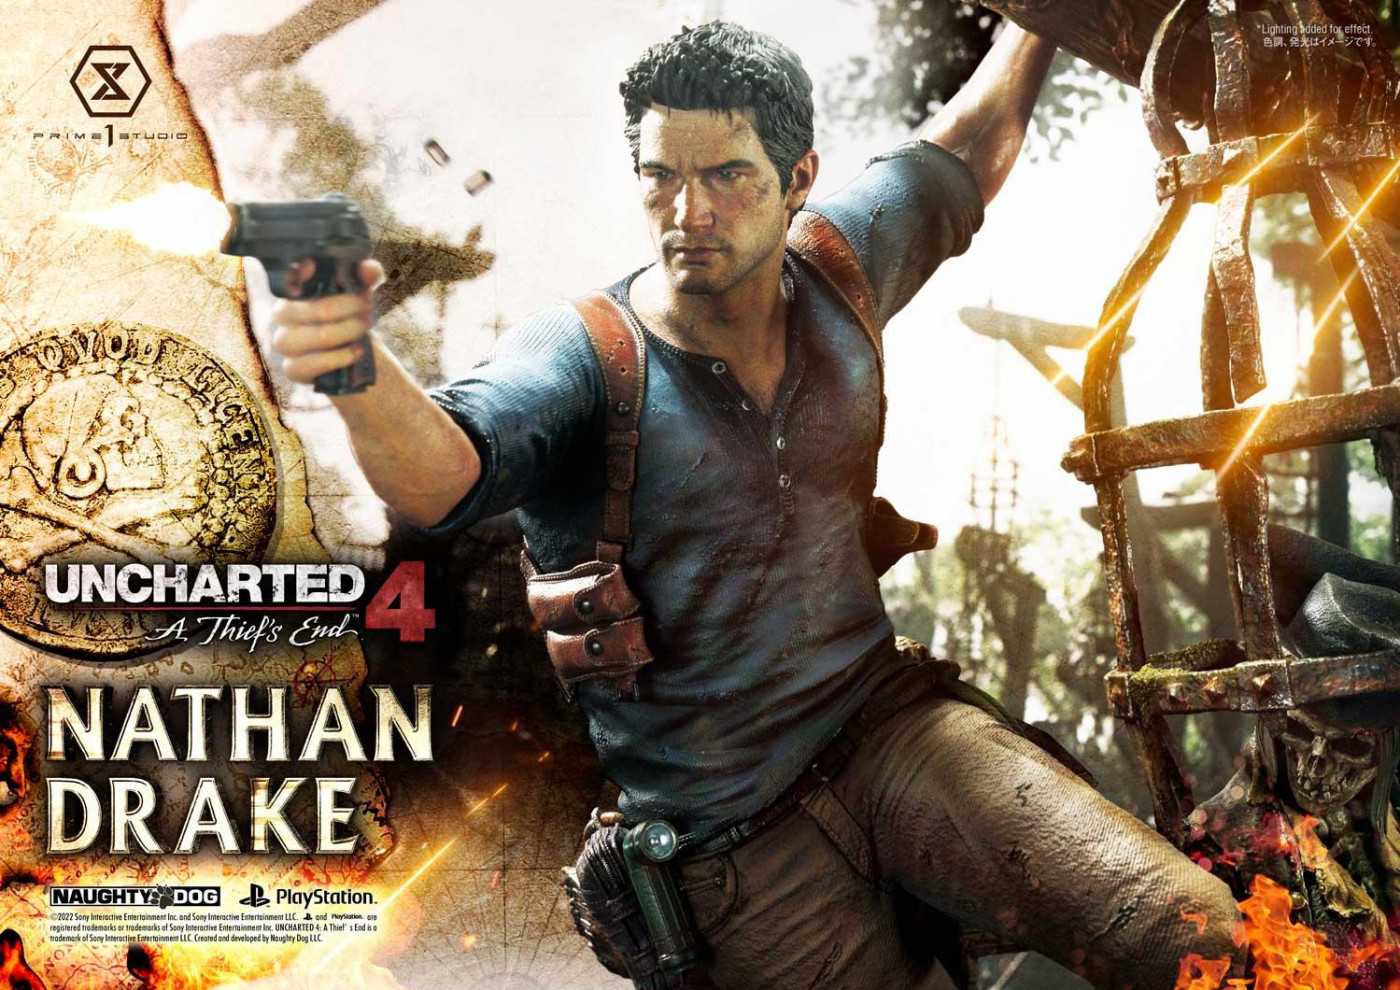 UNCHARTED TRAILER 1  Here's something a little bit exciting to